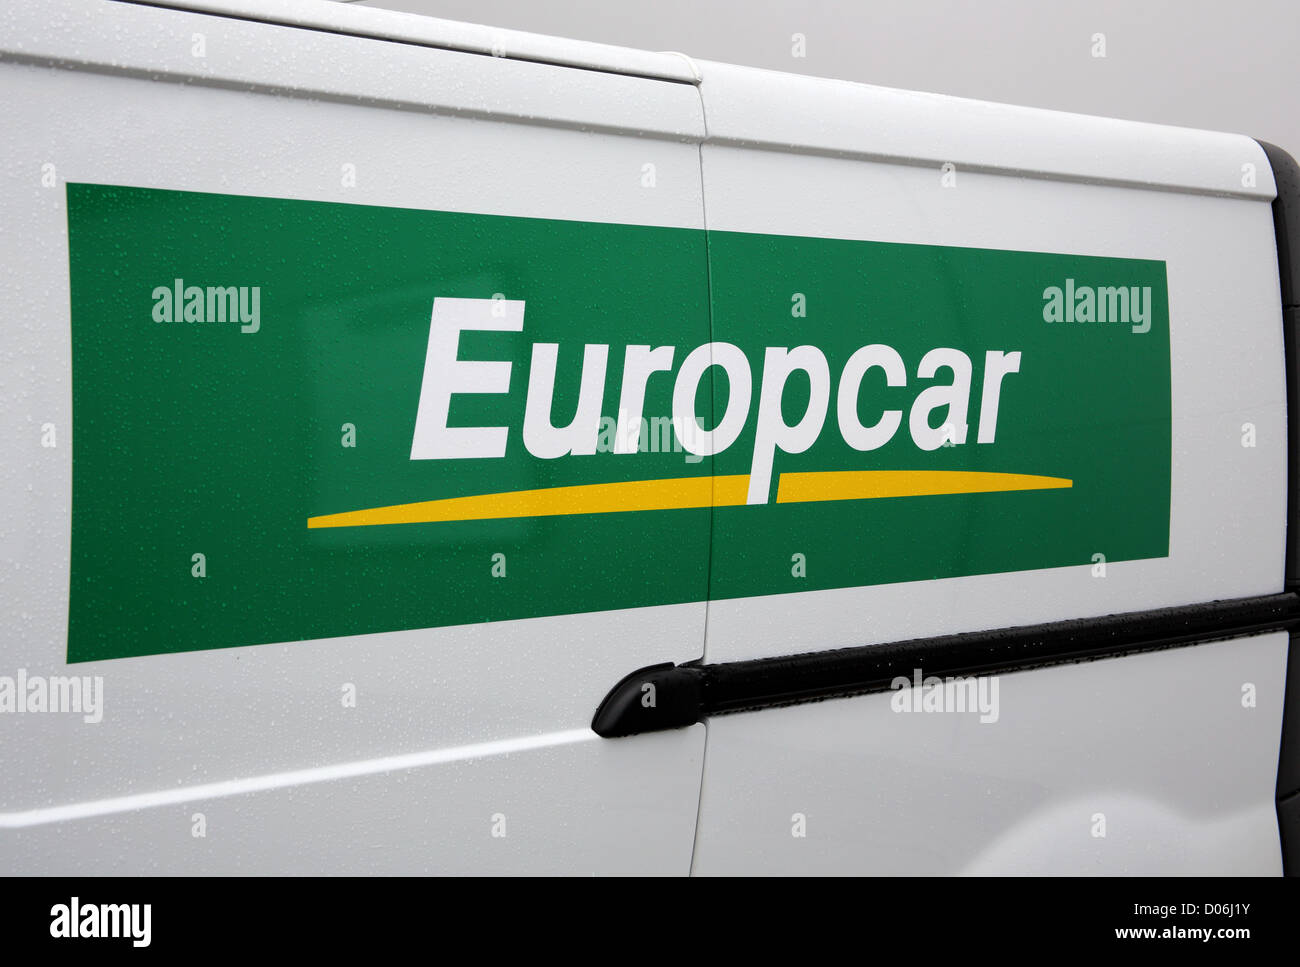 europcar sign and logo on the side of a van Stock Photo